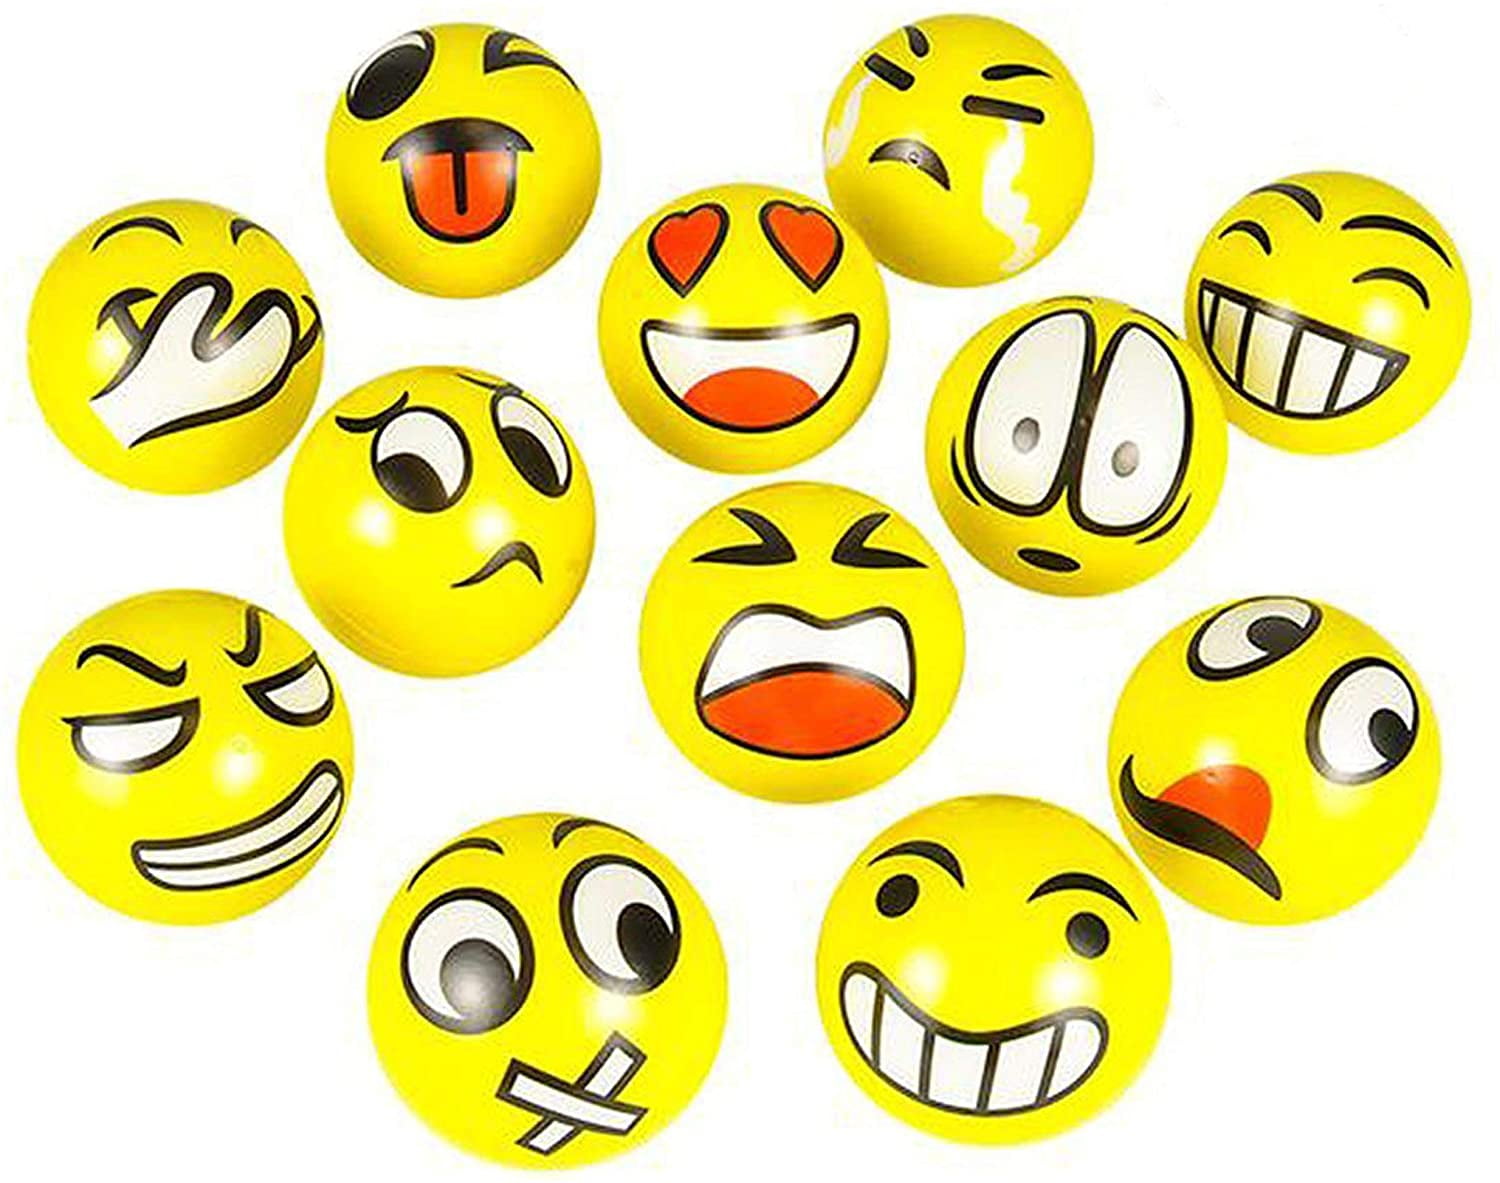 SMILEY STRESS FACE BALL RELIEF ADHD AUTISM RELIEVER HAND EXERCISE 